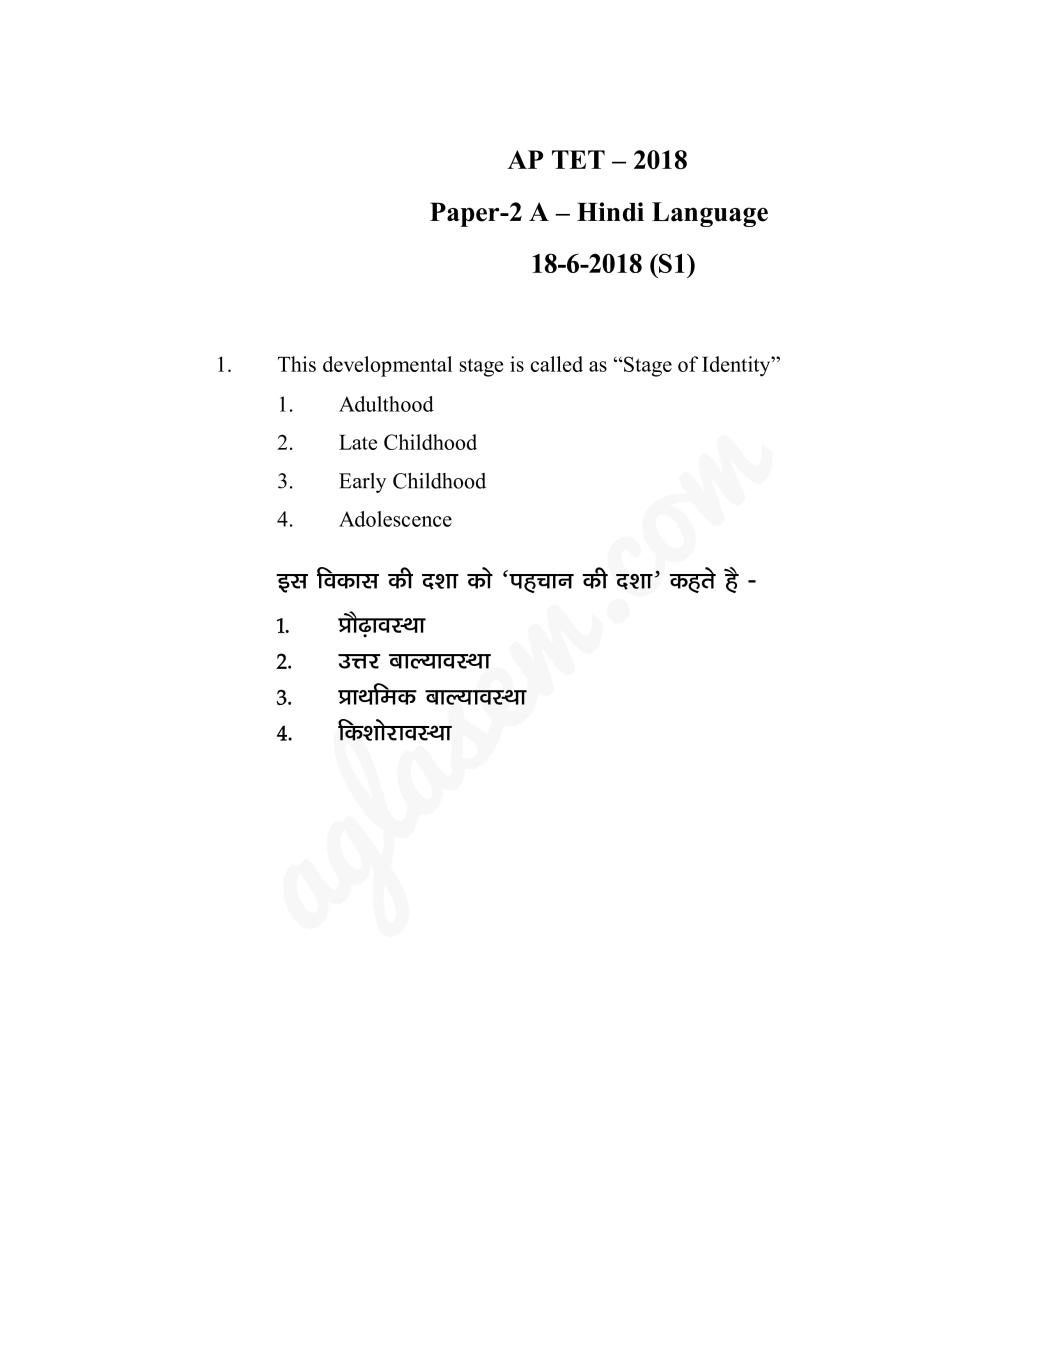 APTET Question Paper with Answers 18 Jun 2018 Paper 2 Hindi (Shift 1) - Page 1